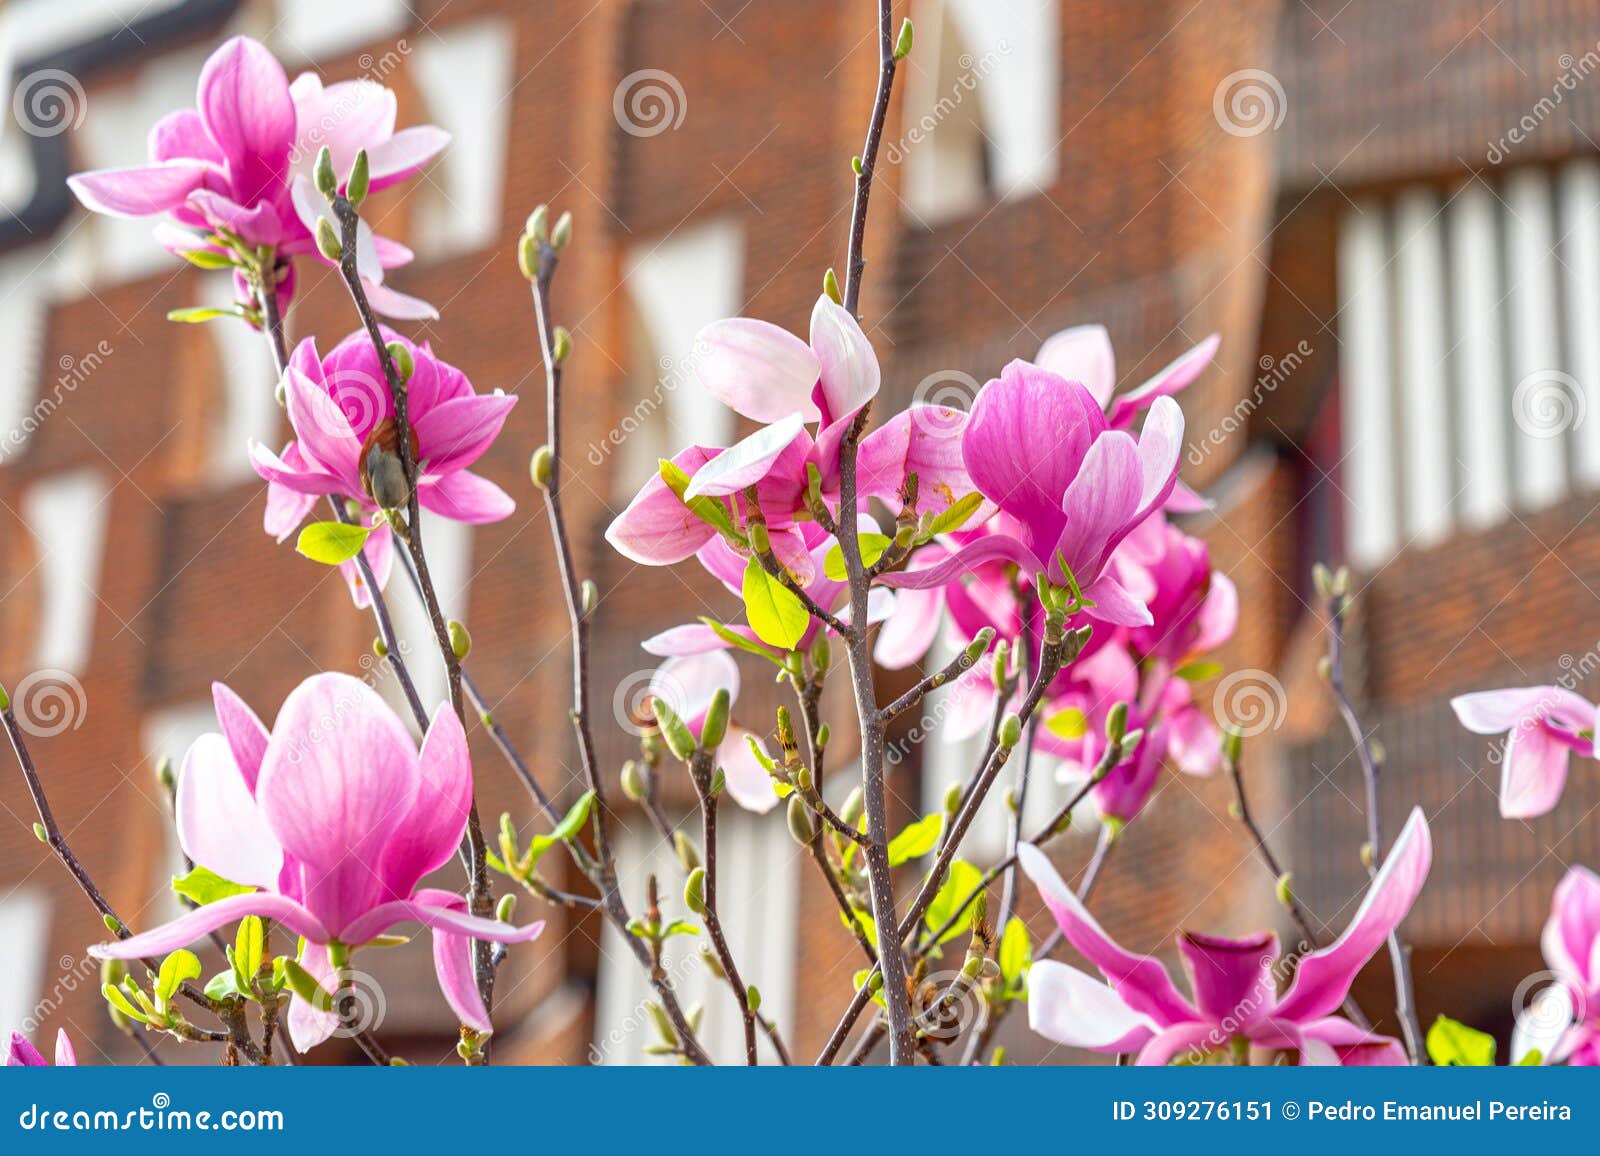 part of a tree with magnolias with an urbanized background of a residential building.